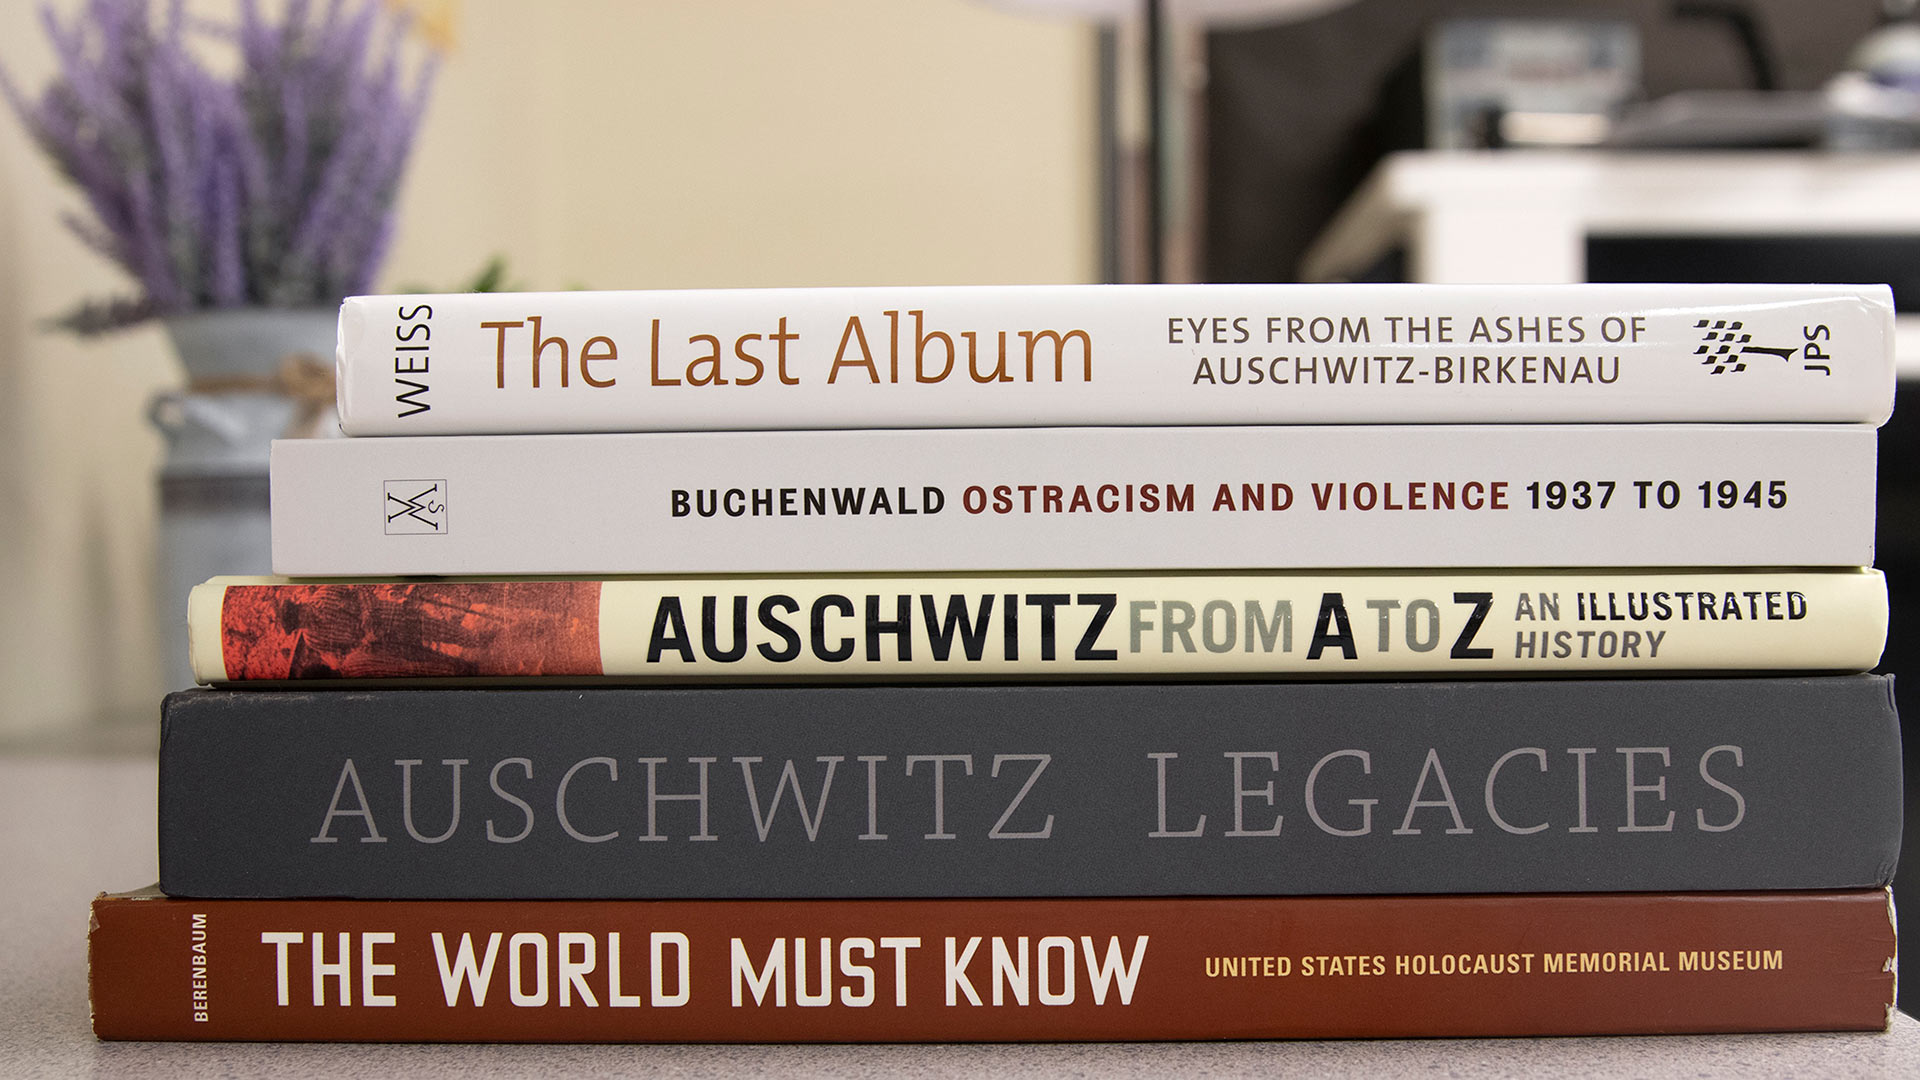 When Amanda Johnson visited the Auschwitz-Birkenau concentration camp in Poland, she didn’t take photos of the heart-wrenching scenes at the memorial. Instead, she bought books to help her students learn about the millions of Jews and others who were exterminated during the Holocaust.